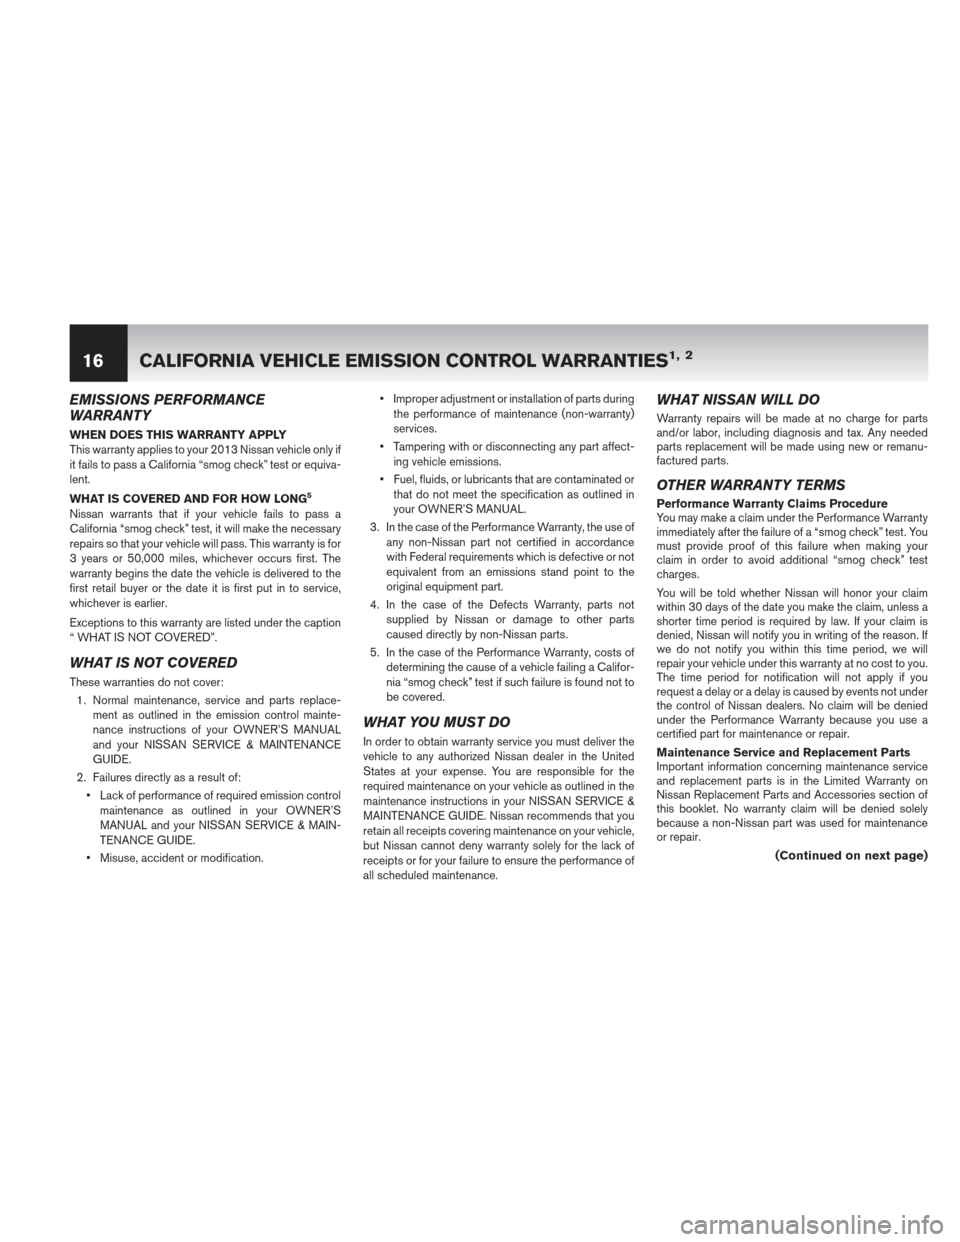 NISSAN ALTIMA 2013 L33 / 5.G Warranty Booklet EMISSIONS PERFORMANCE
WARRANTY
WHEN DOES THIS WARRANTY APPLY
This warranty applies to your 2013 Nissan vehicle only if
it fails to pass a California “smog check” test or equiva-
lent.
WHAT IS COVE